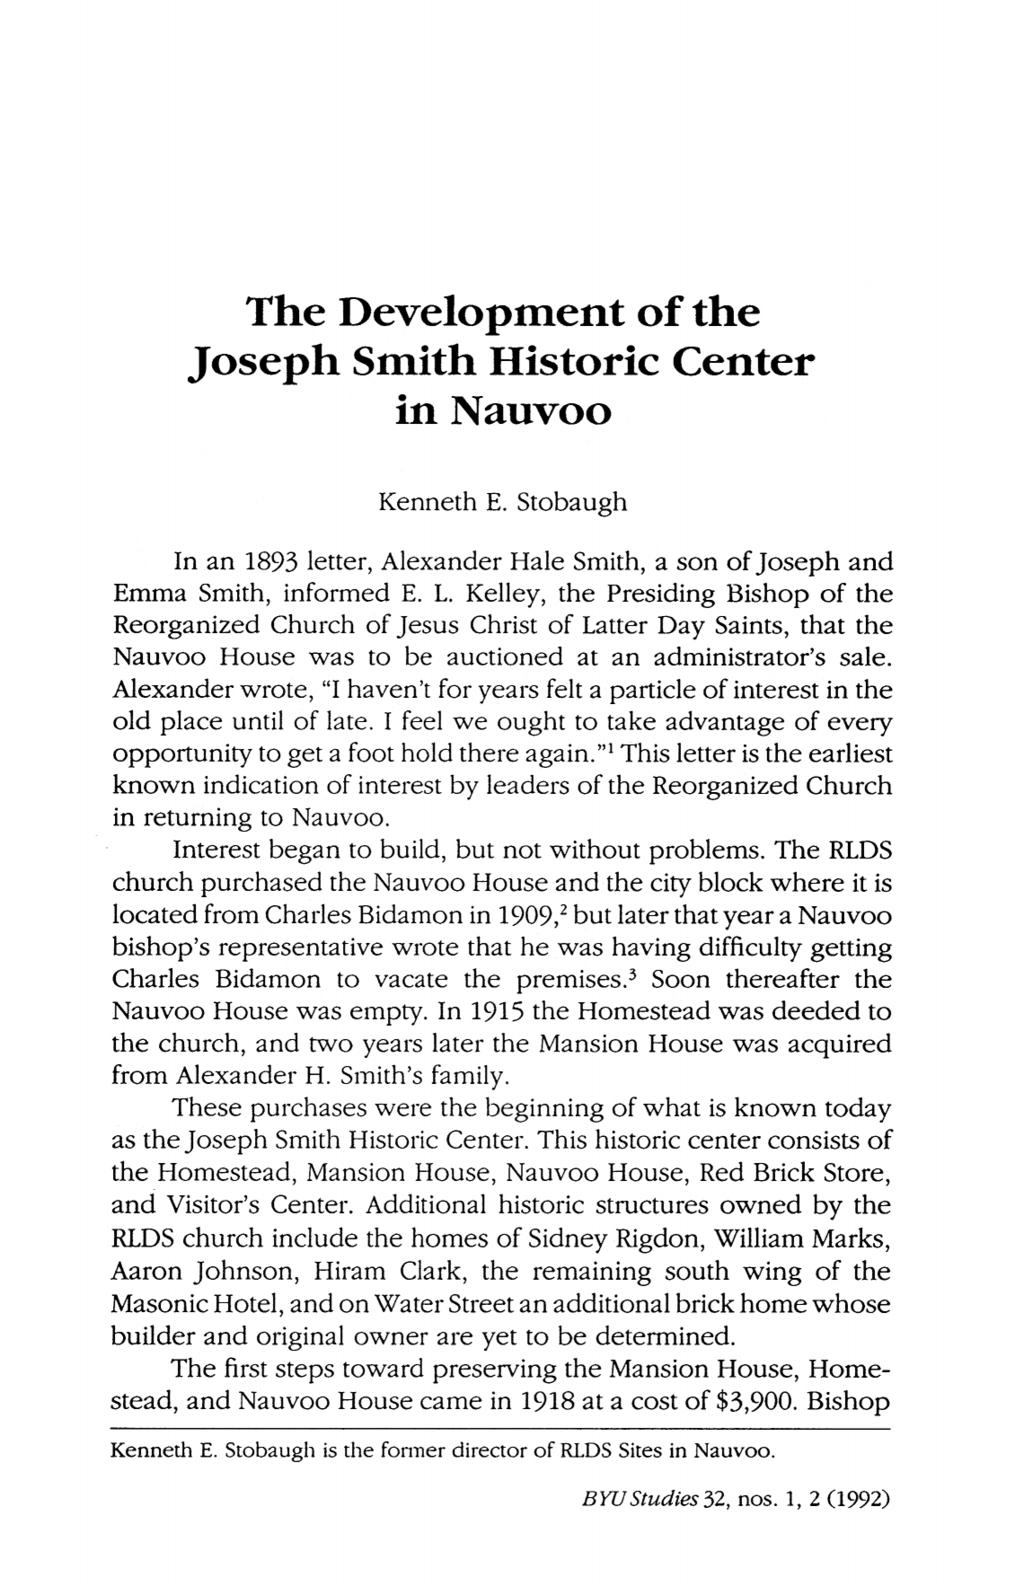 Stobaugh: The Development of the Joseph Smith Historic Center in Nauvoo the development of the joseph smith historic center in nauvoo kenneth E stobaugh in an 1893 letter alexander hale smith a son